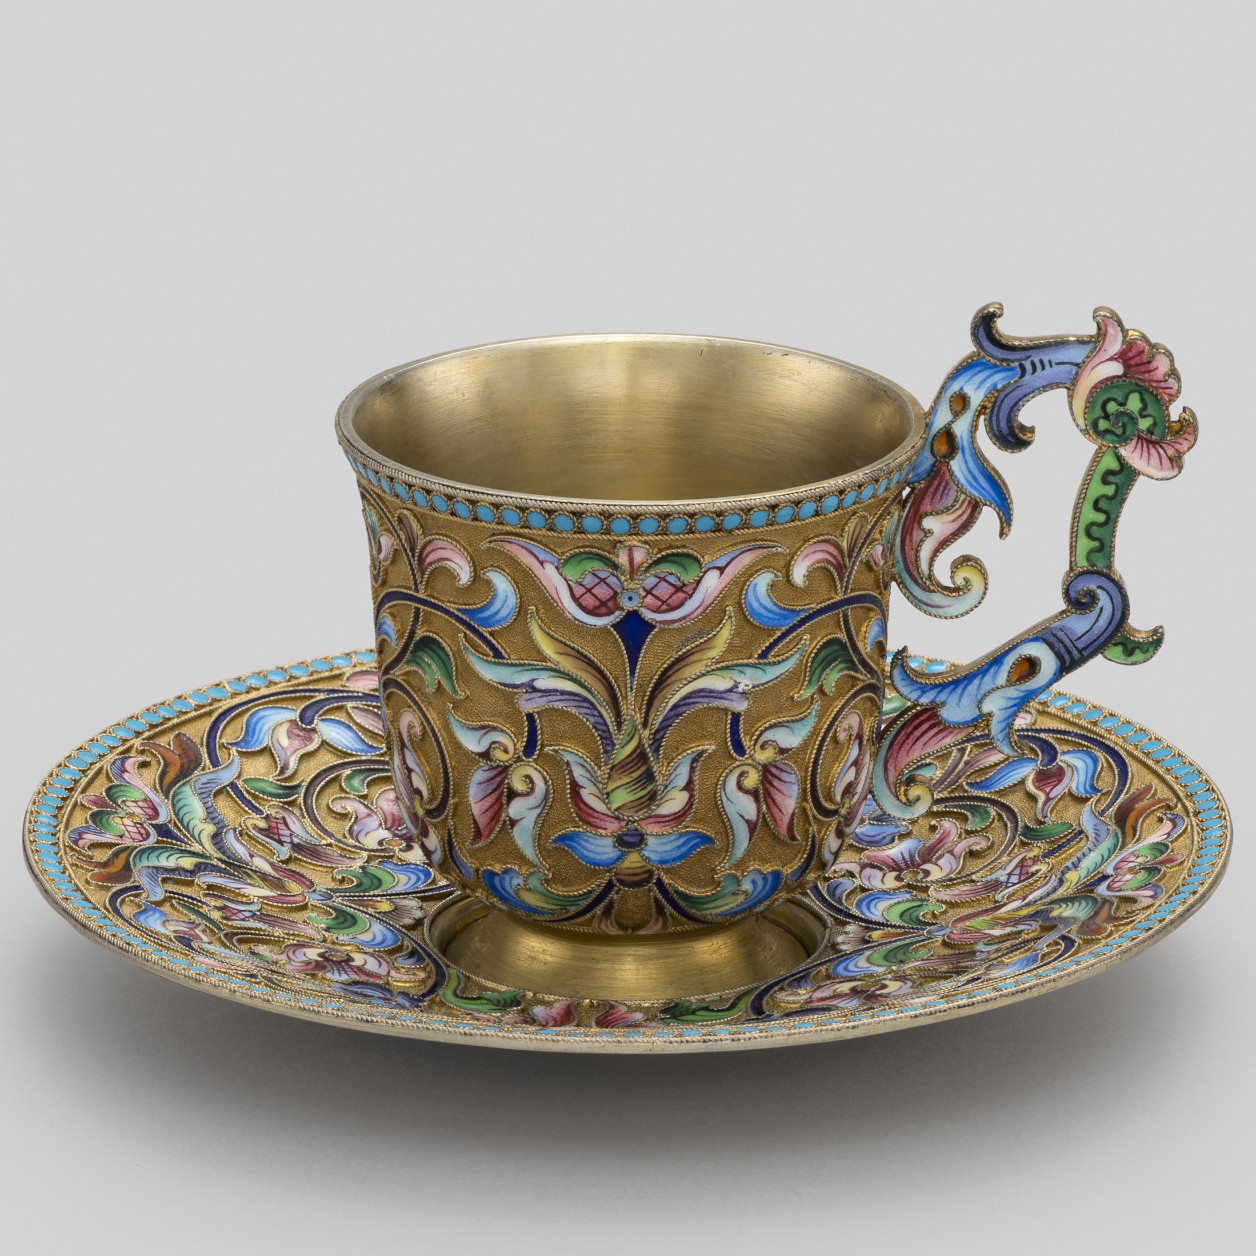 Russian cloisonne silver enamel cup and saucer by Maria Semenova